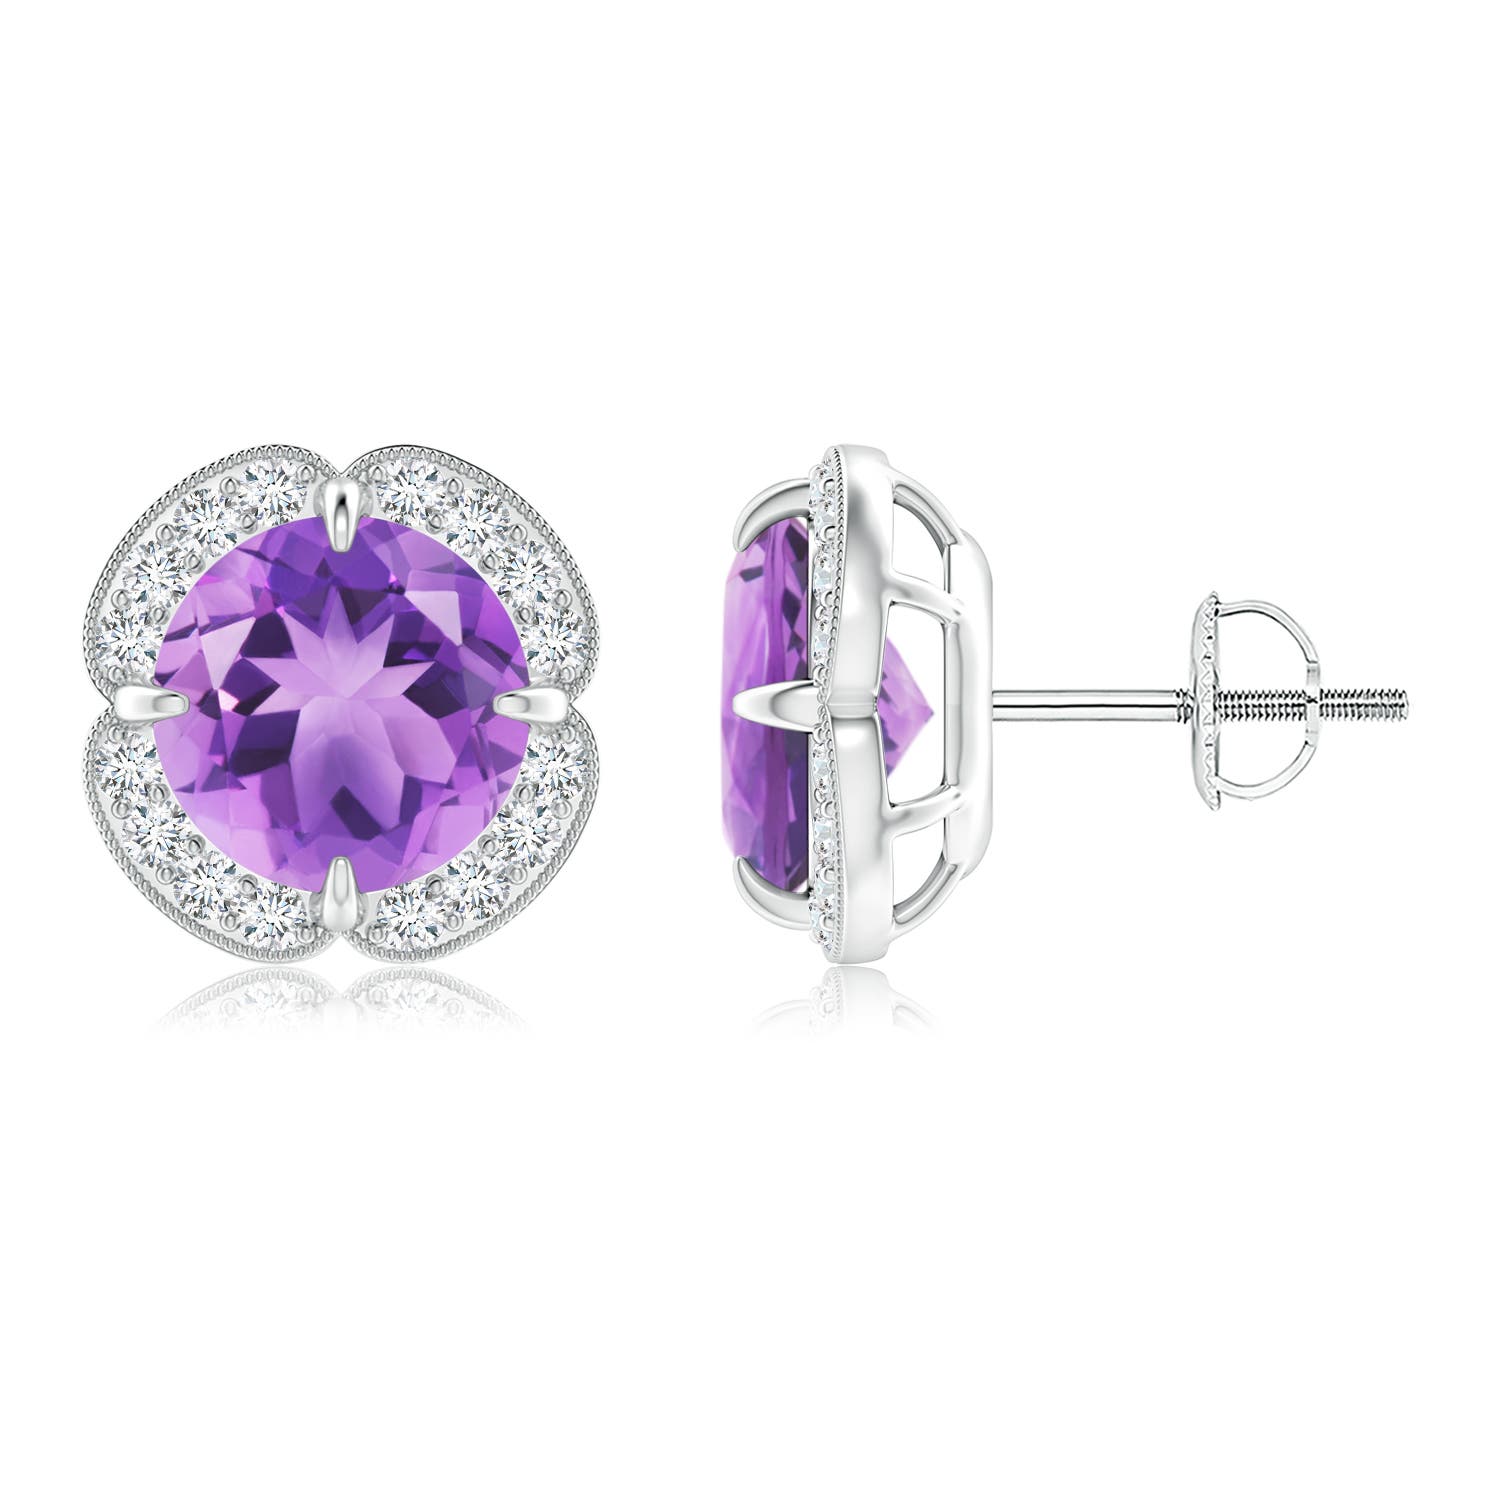 A - Amethyst / 3.85 CT / 14 KT White Gold